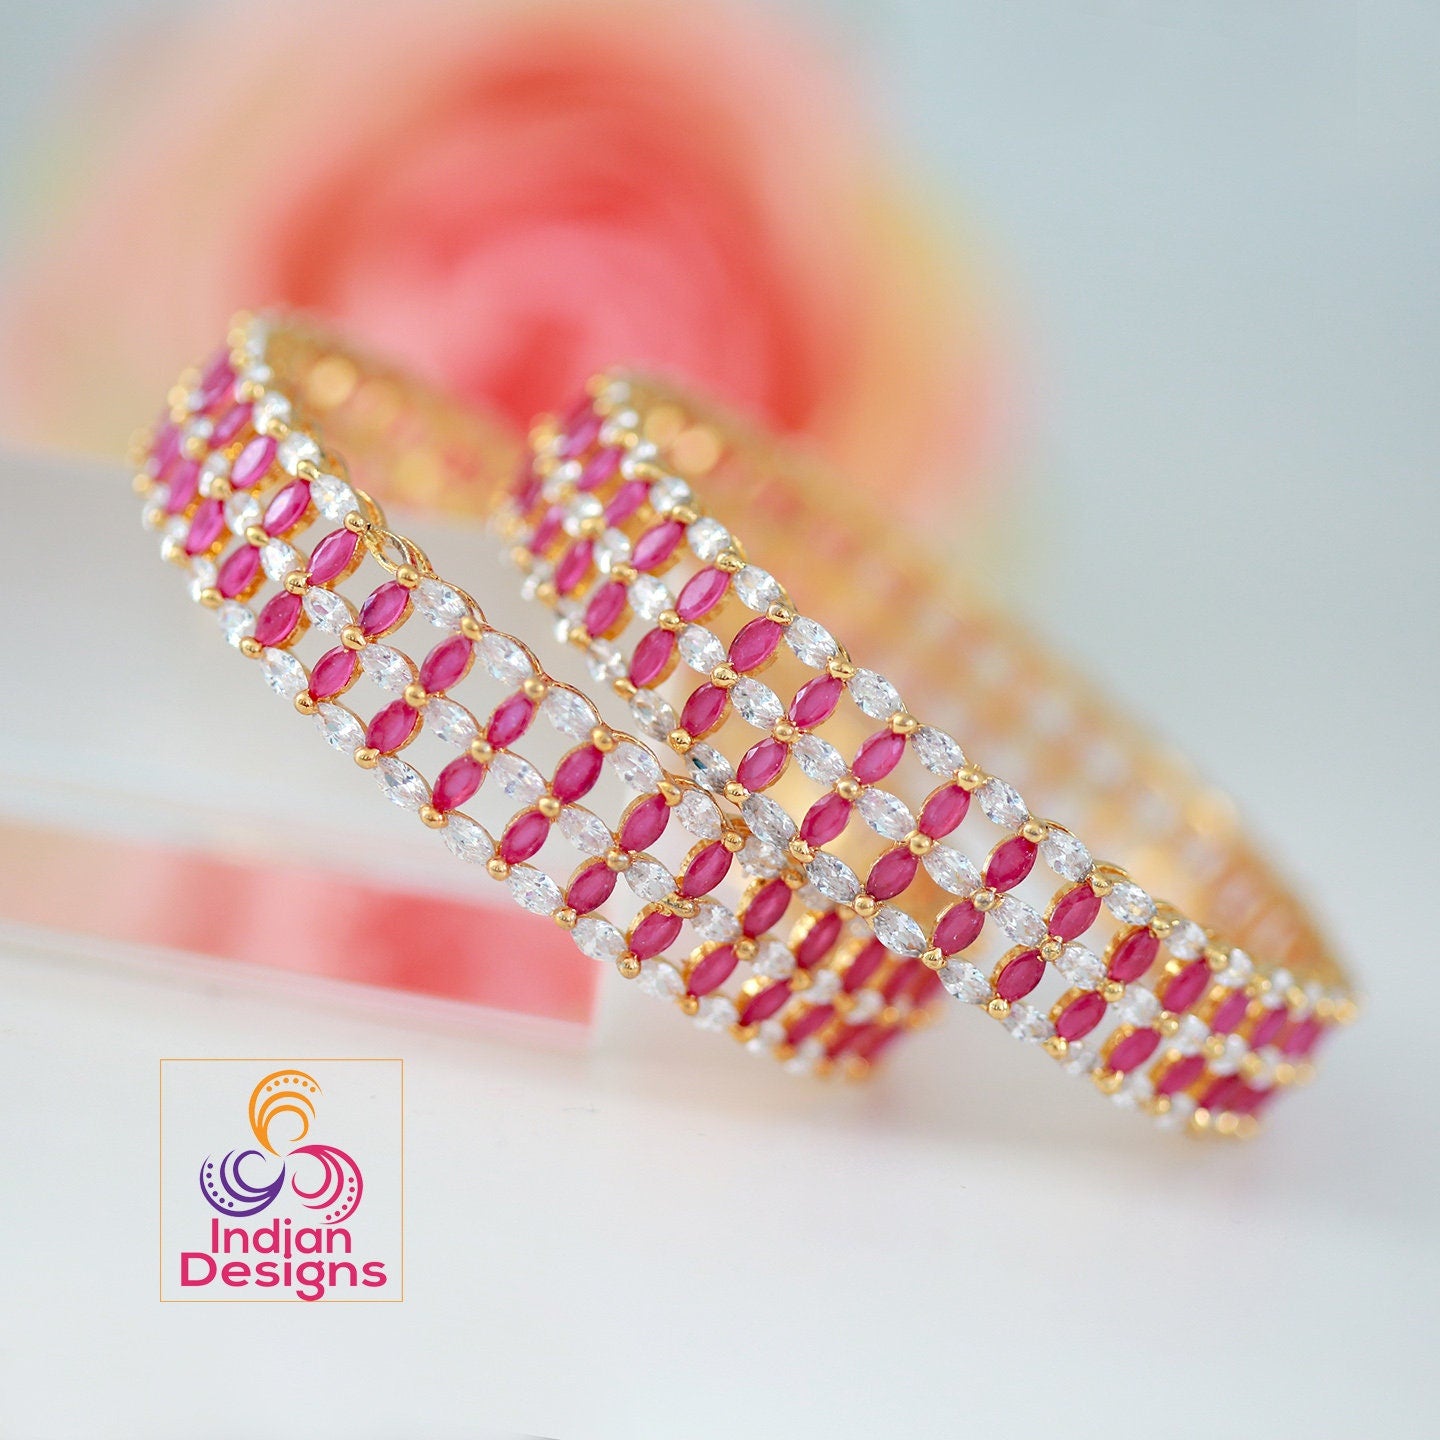 22k Gold plated American diamond marquise cut ruby stone bangles | CZ AD Bangle bracelet From Indian Designs | Party wear designer bangles